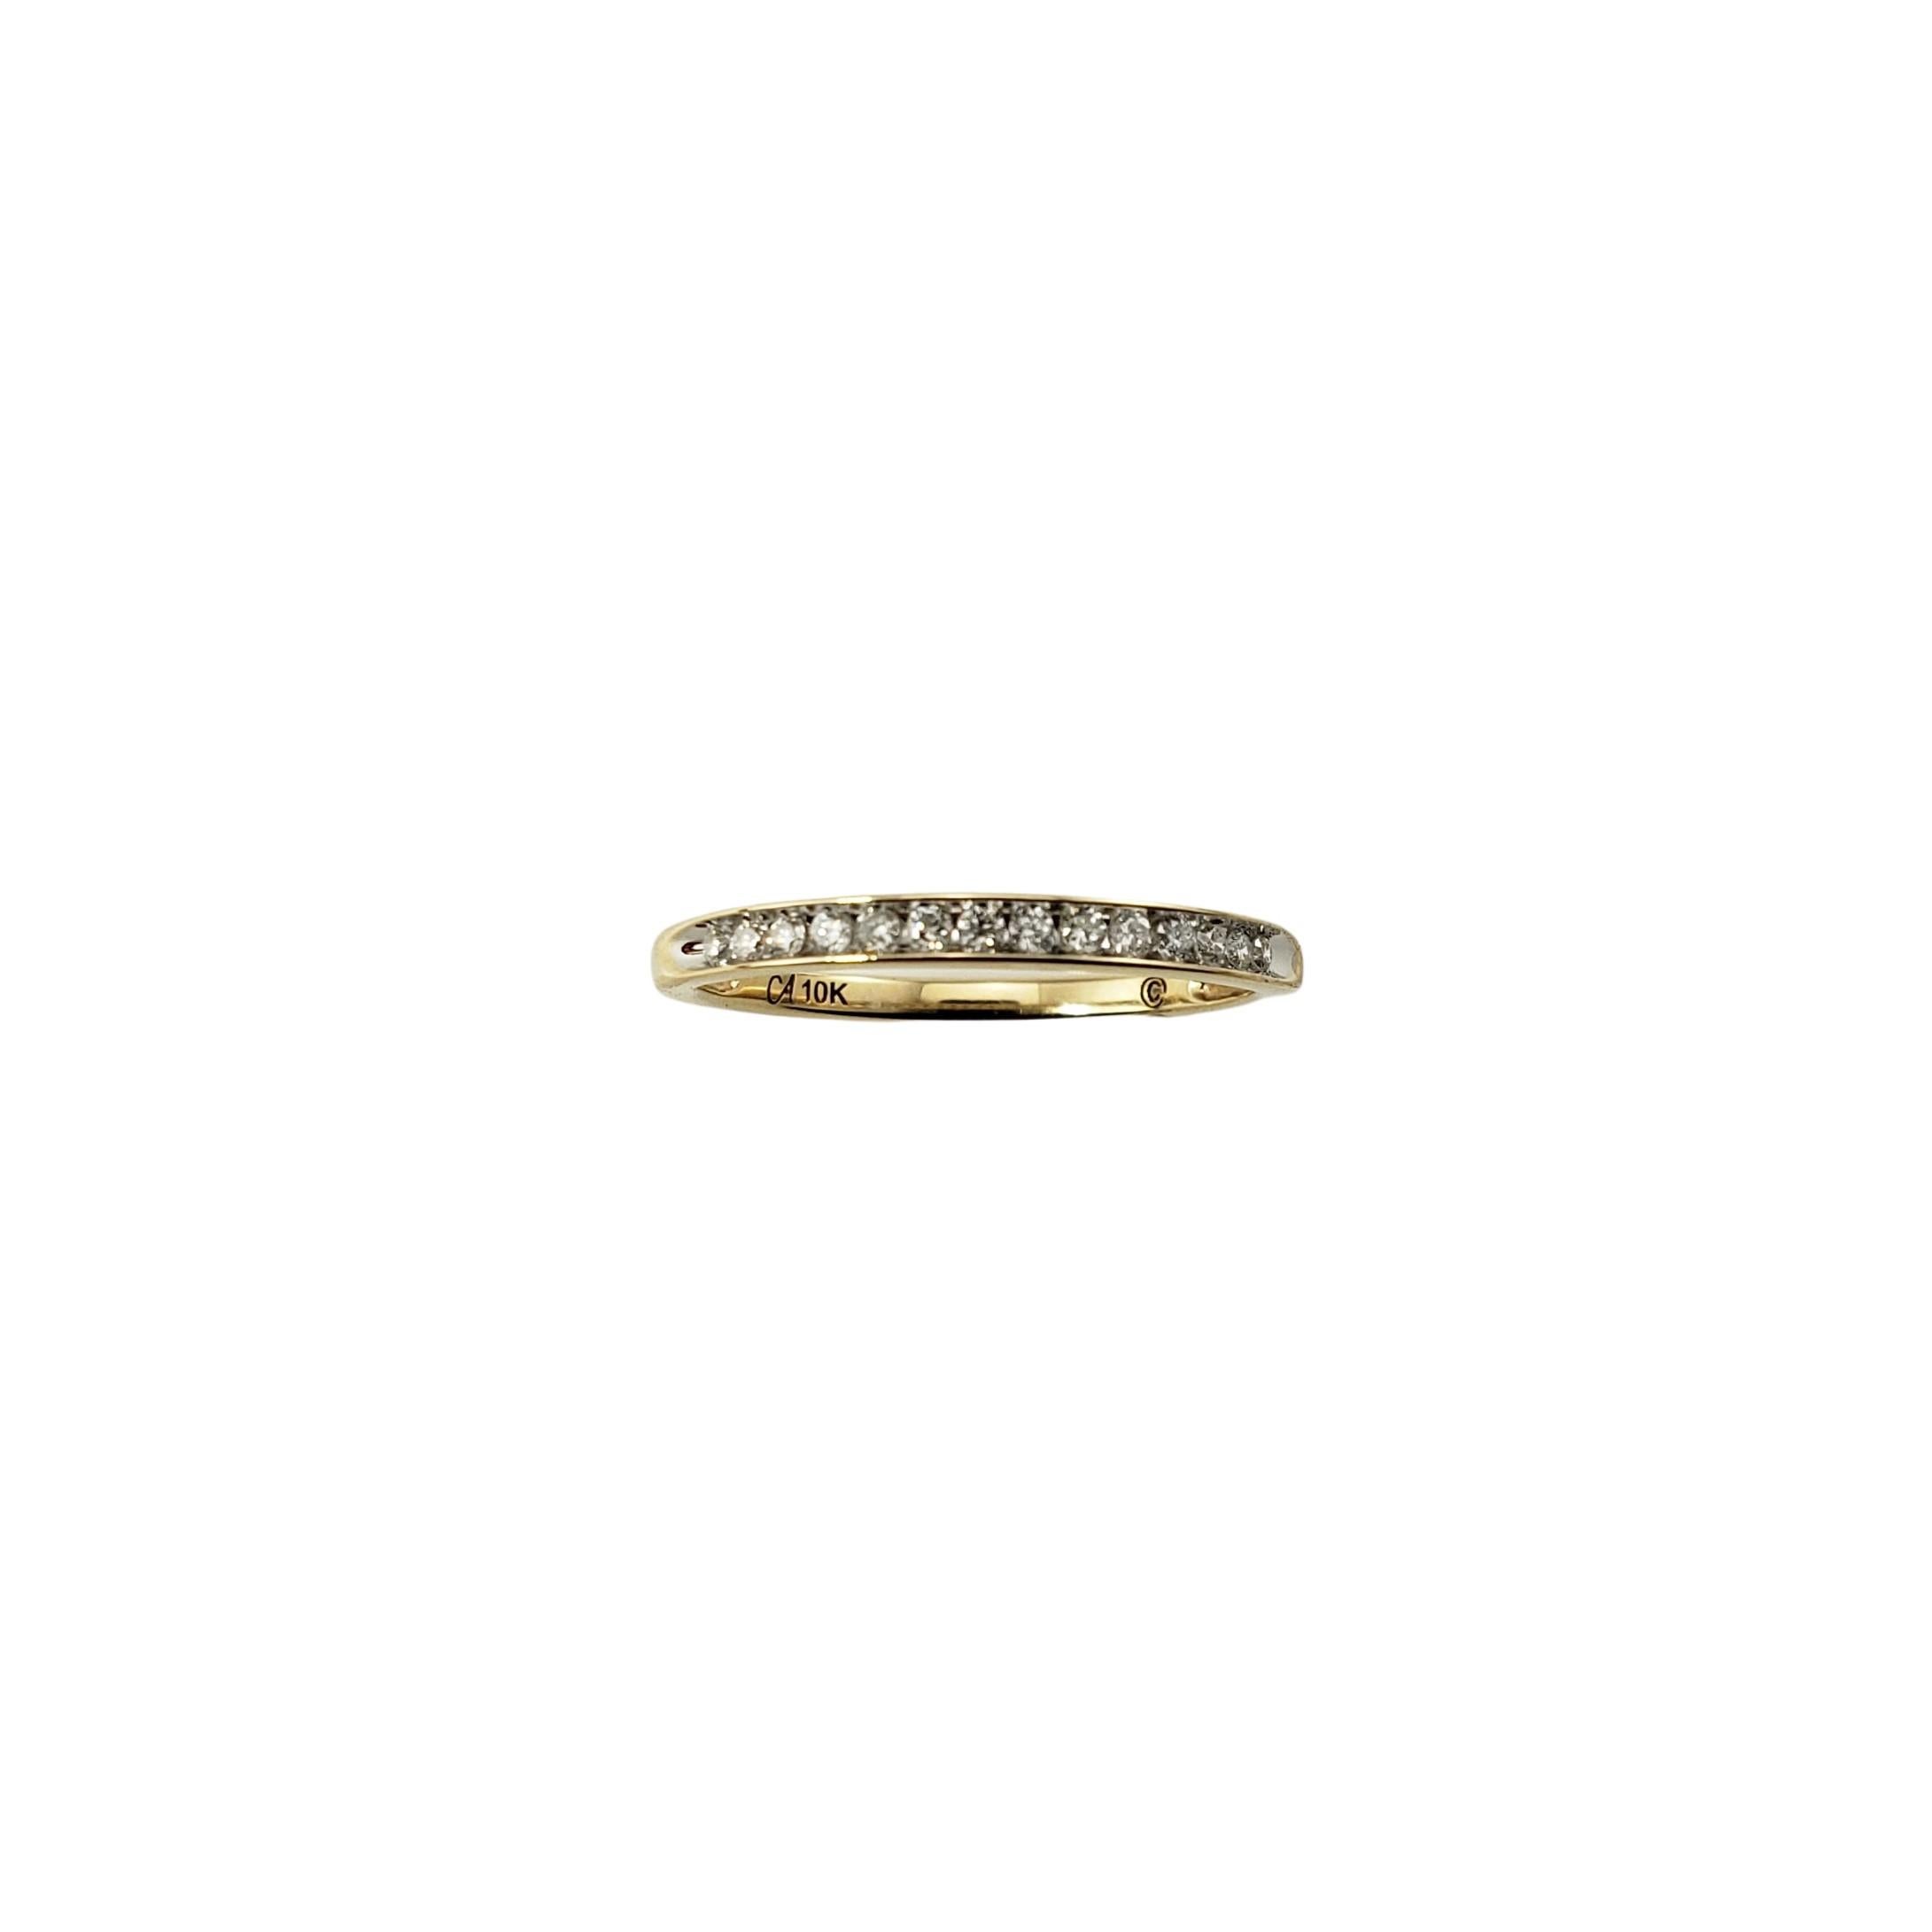 10 Karat Yellow Gold and Diamond Wedding Band Ring Size 7.25-

This elegant band features 14 round brilliant cut diamonds set in classic 10K yellow gold.  Width:  2 mm.

Approximate total diamond weight:  .14 ct.

Diamond color: H-I

Diamond